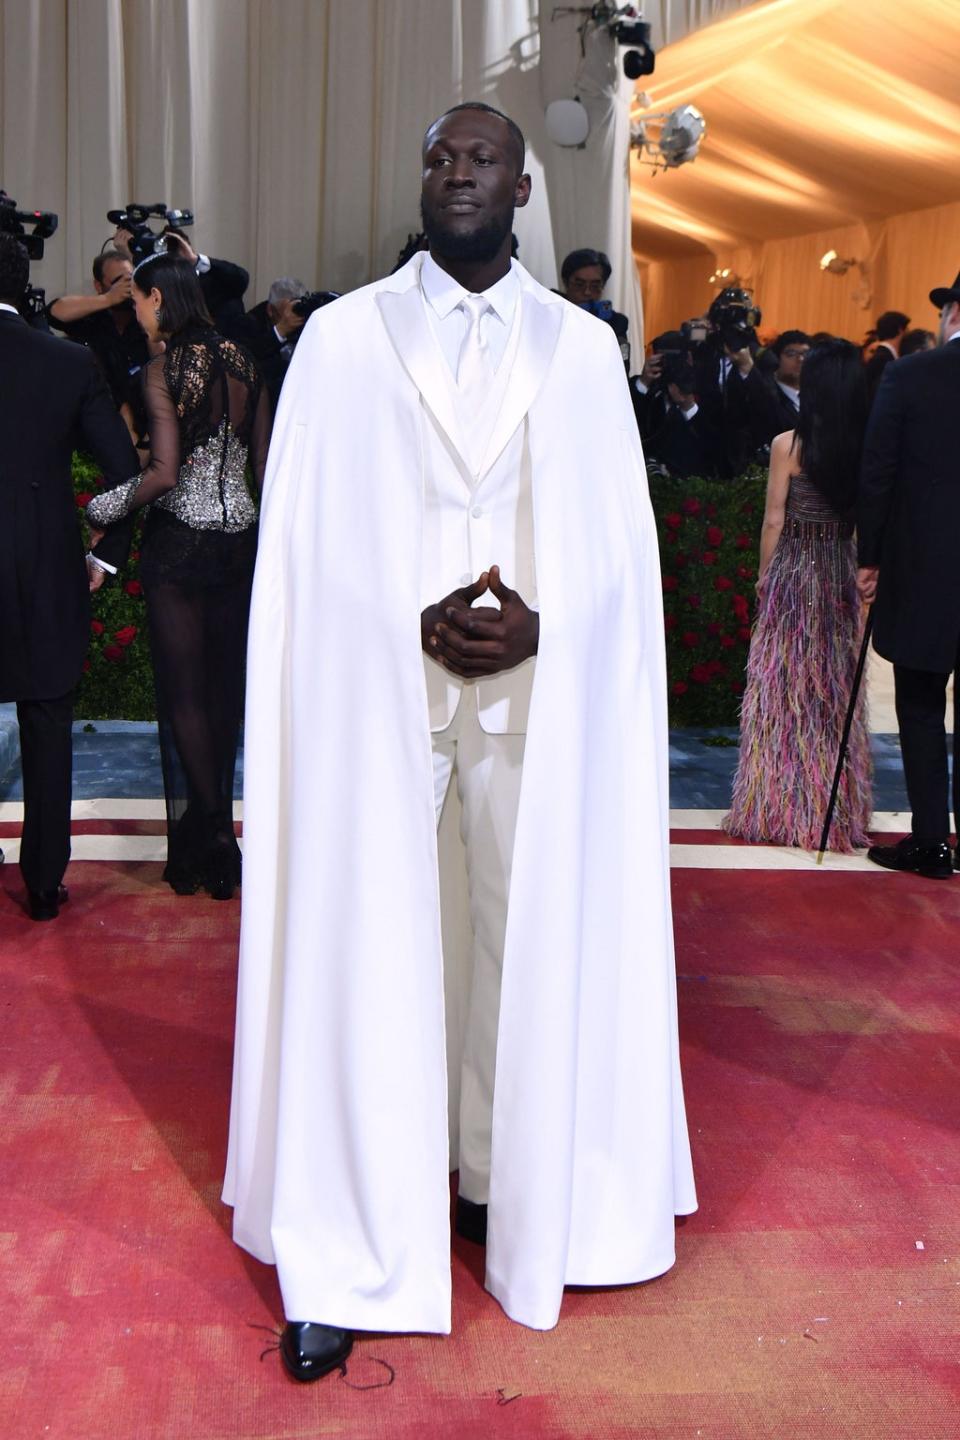 British rapper Stormzy arrives for the 2022 Met Gala at the Metropolitan Museum of Art on May 2, 2022, in New York (AFP via Getty Images)